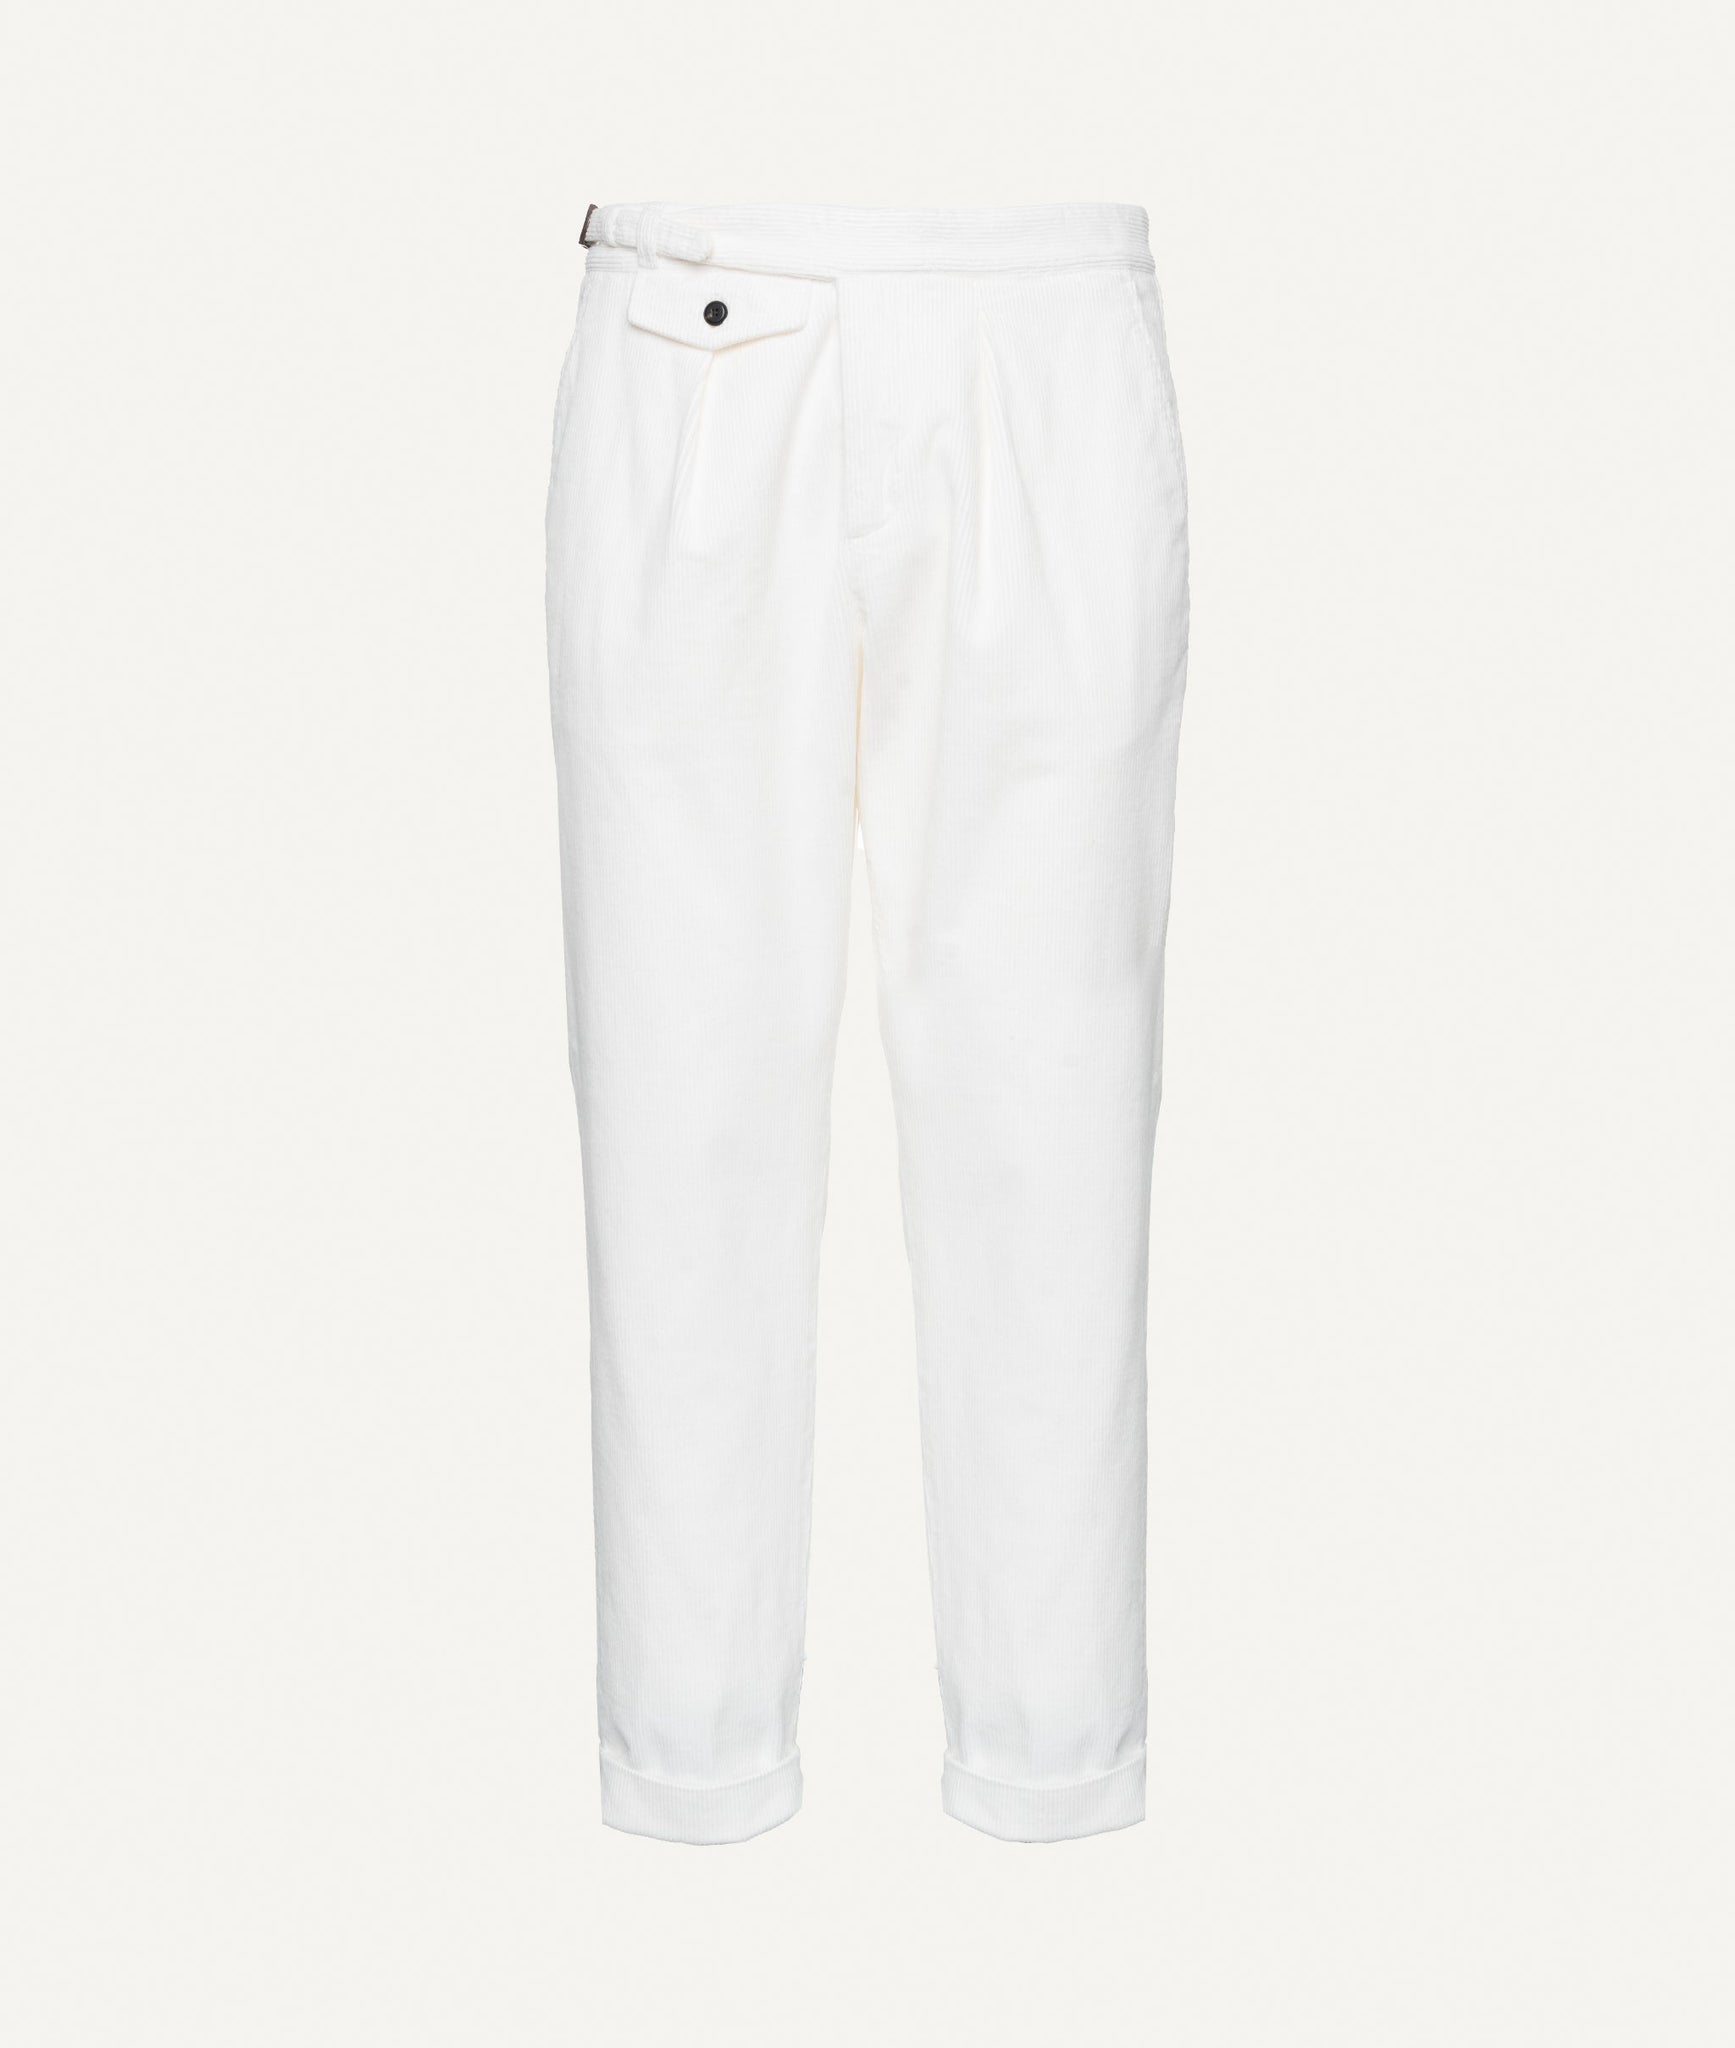 Eleventy - Ribbed Pants in Cotton